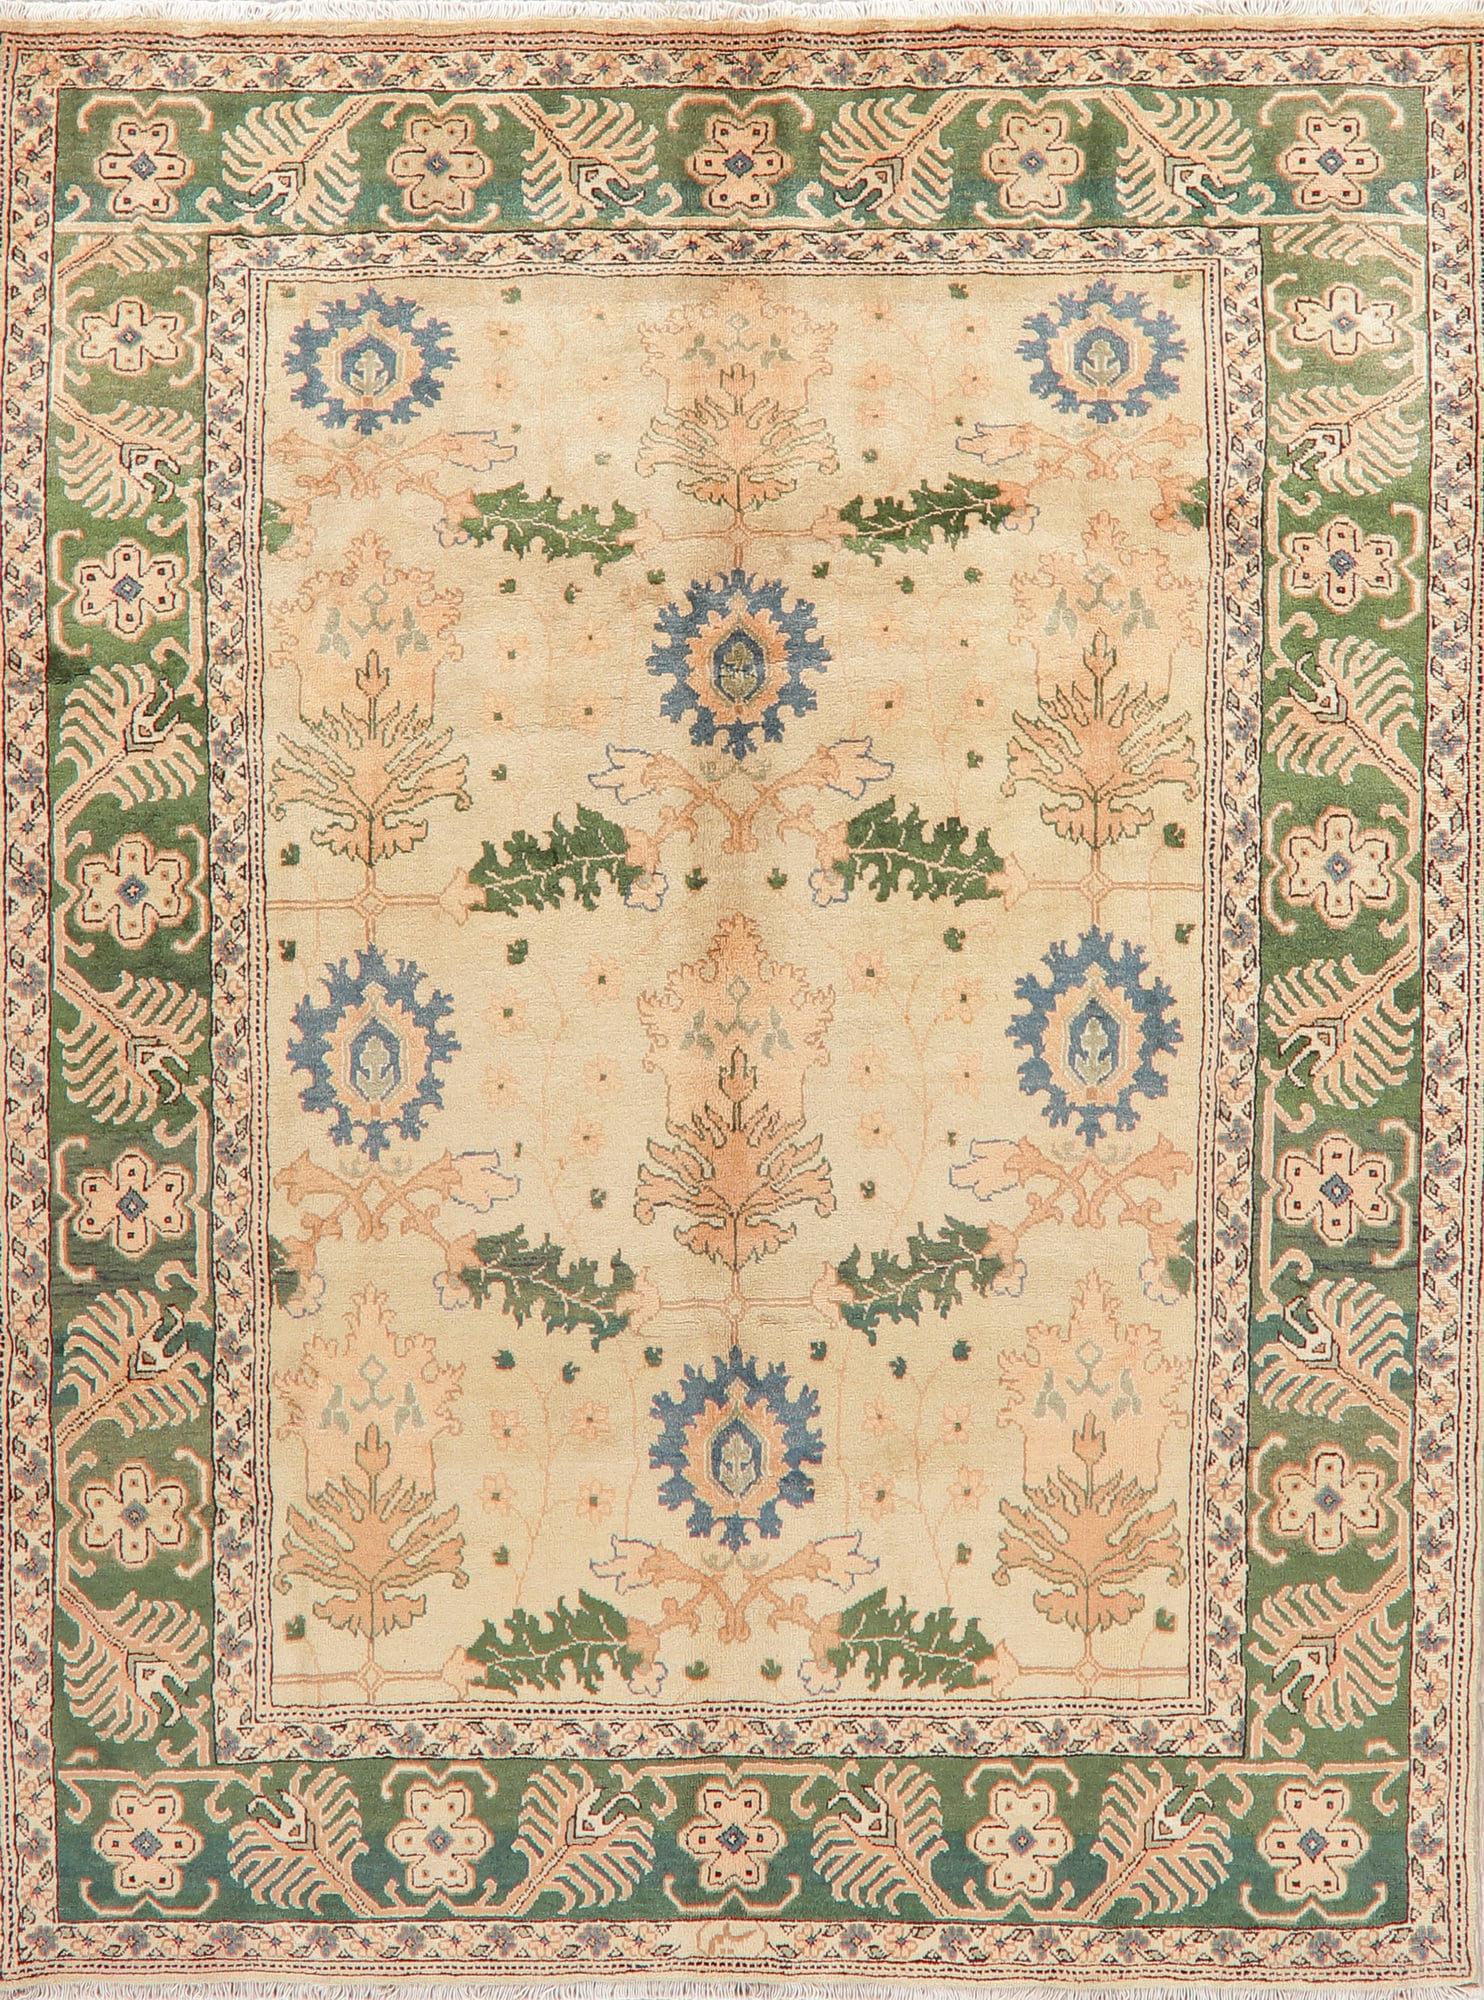 BLACK FRIDAY DEAL Floral Sarouk Oriental Hand-Knotted Area Rug Ivory & Green Living Room Carpet ...